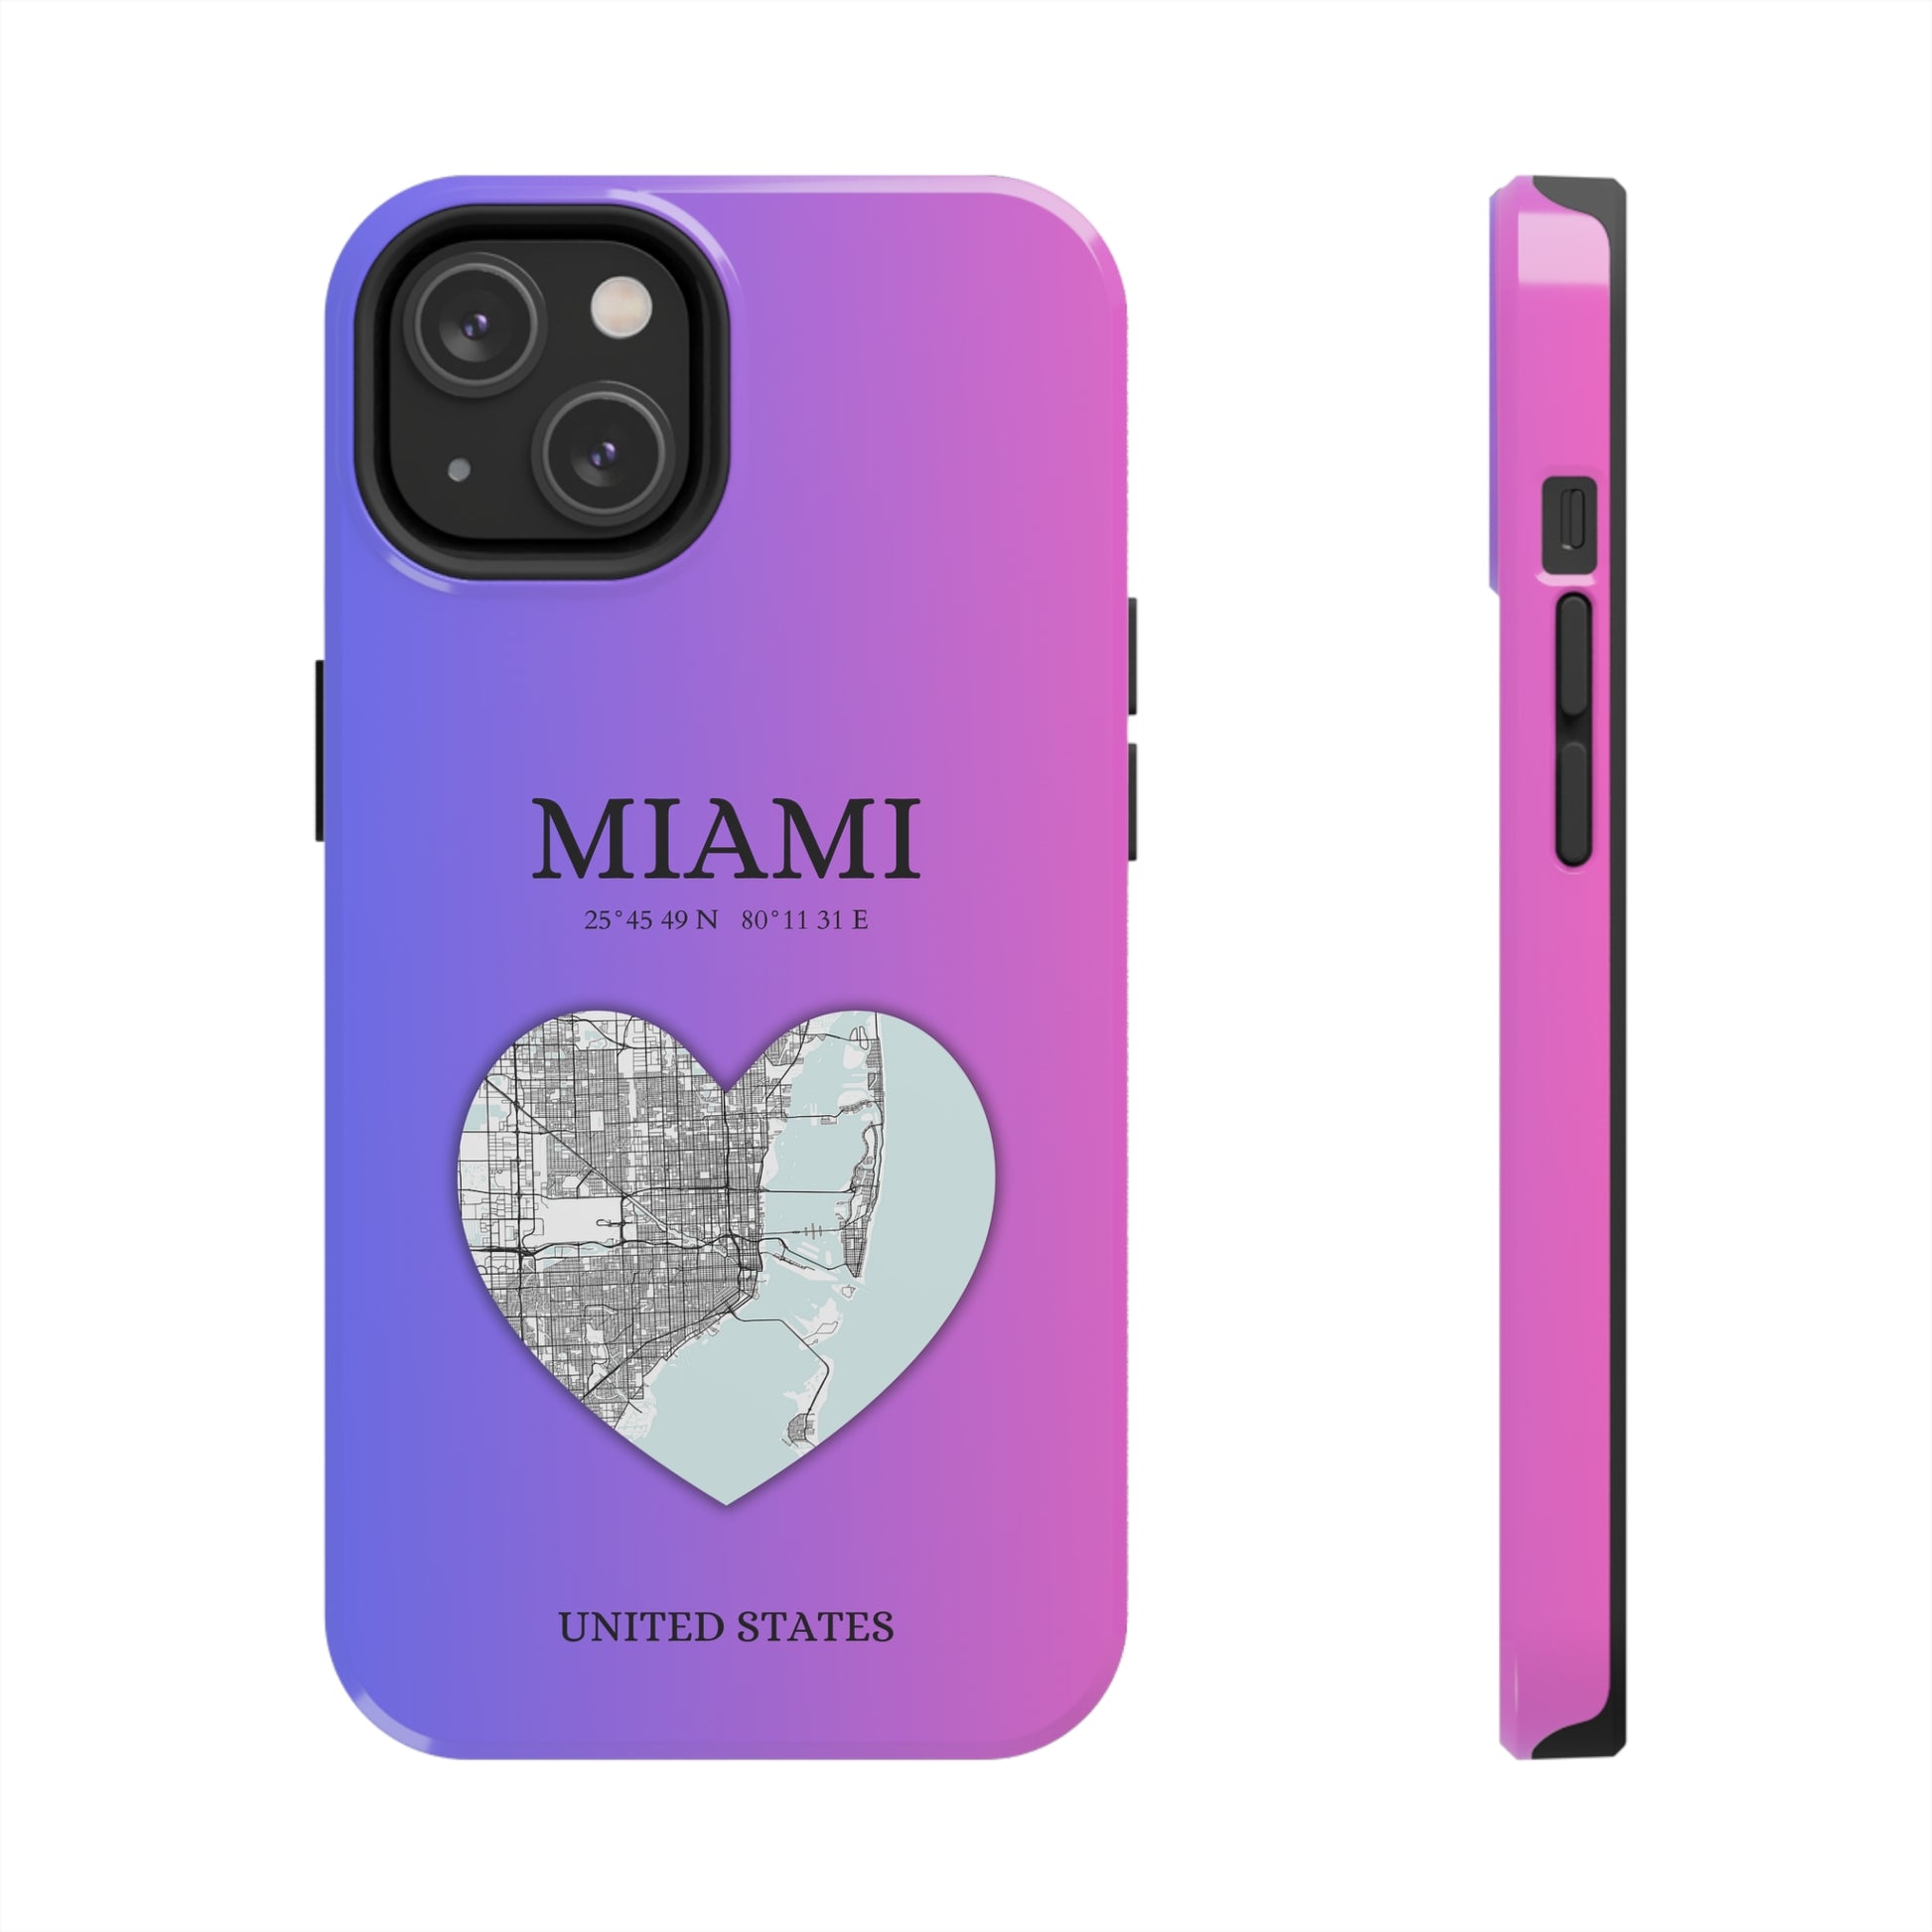 Miami Heartbeat - Magenta (iPhone Case 11-15)Elevate your iPhone's style with Rima's Miami Heartbeat case. Sleek, durable protection for models 11-15. Free US shipping.RimaGallery